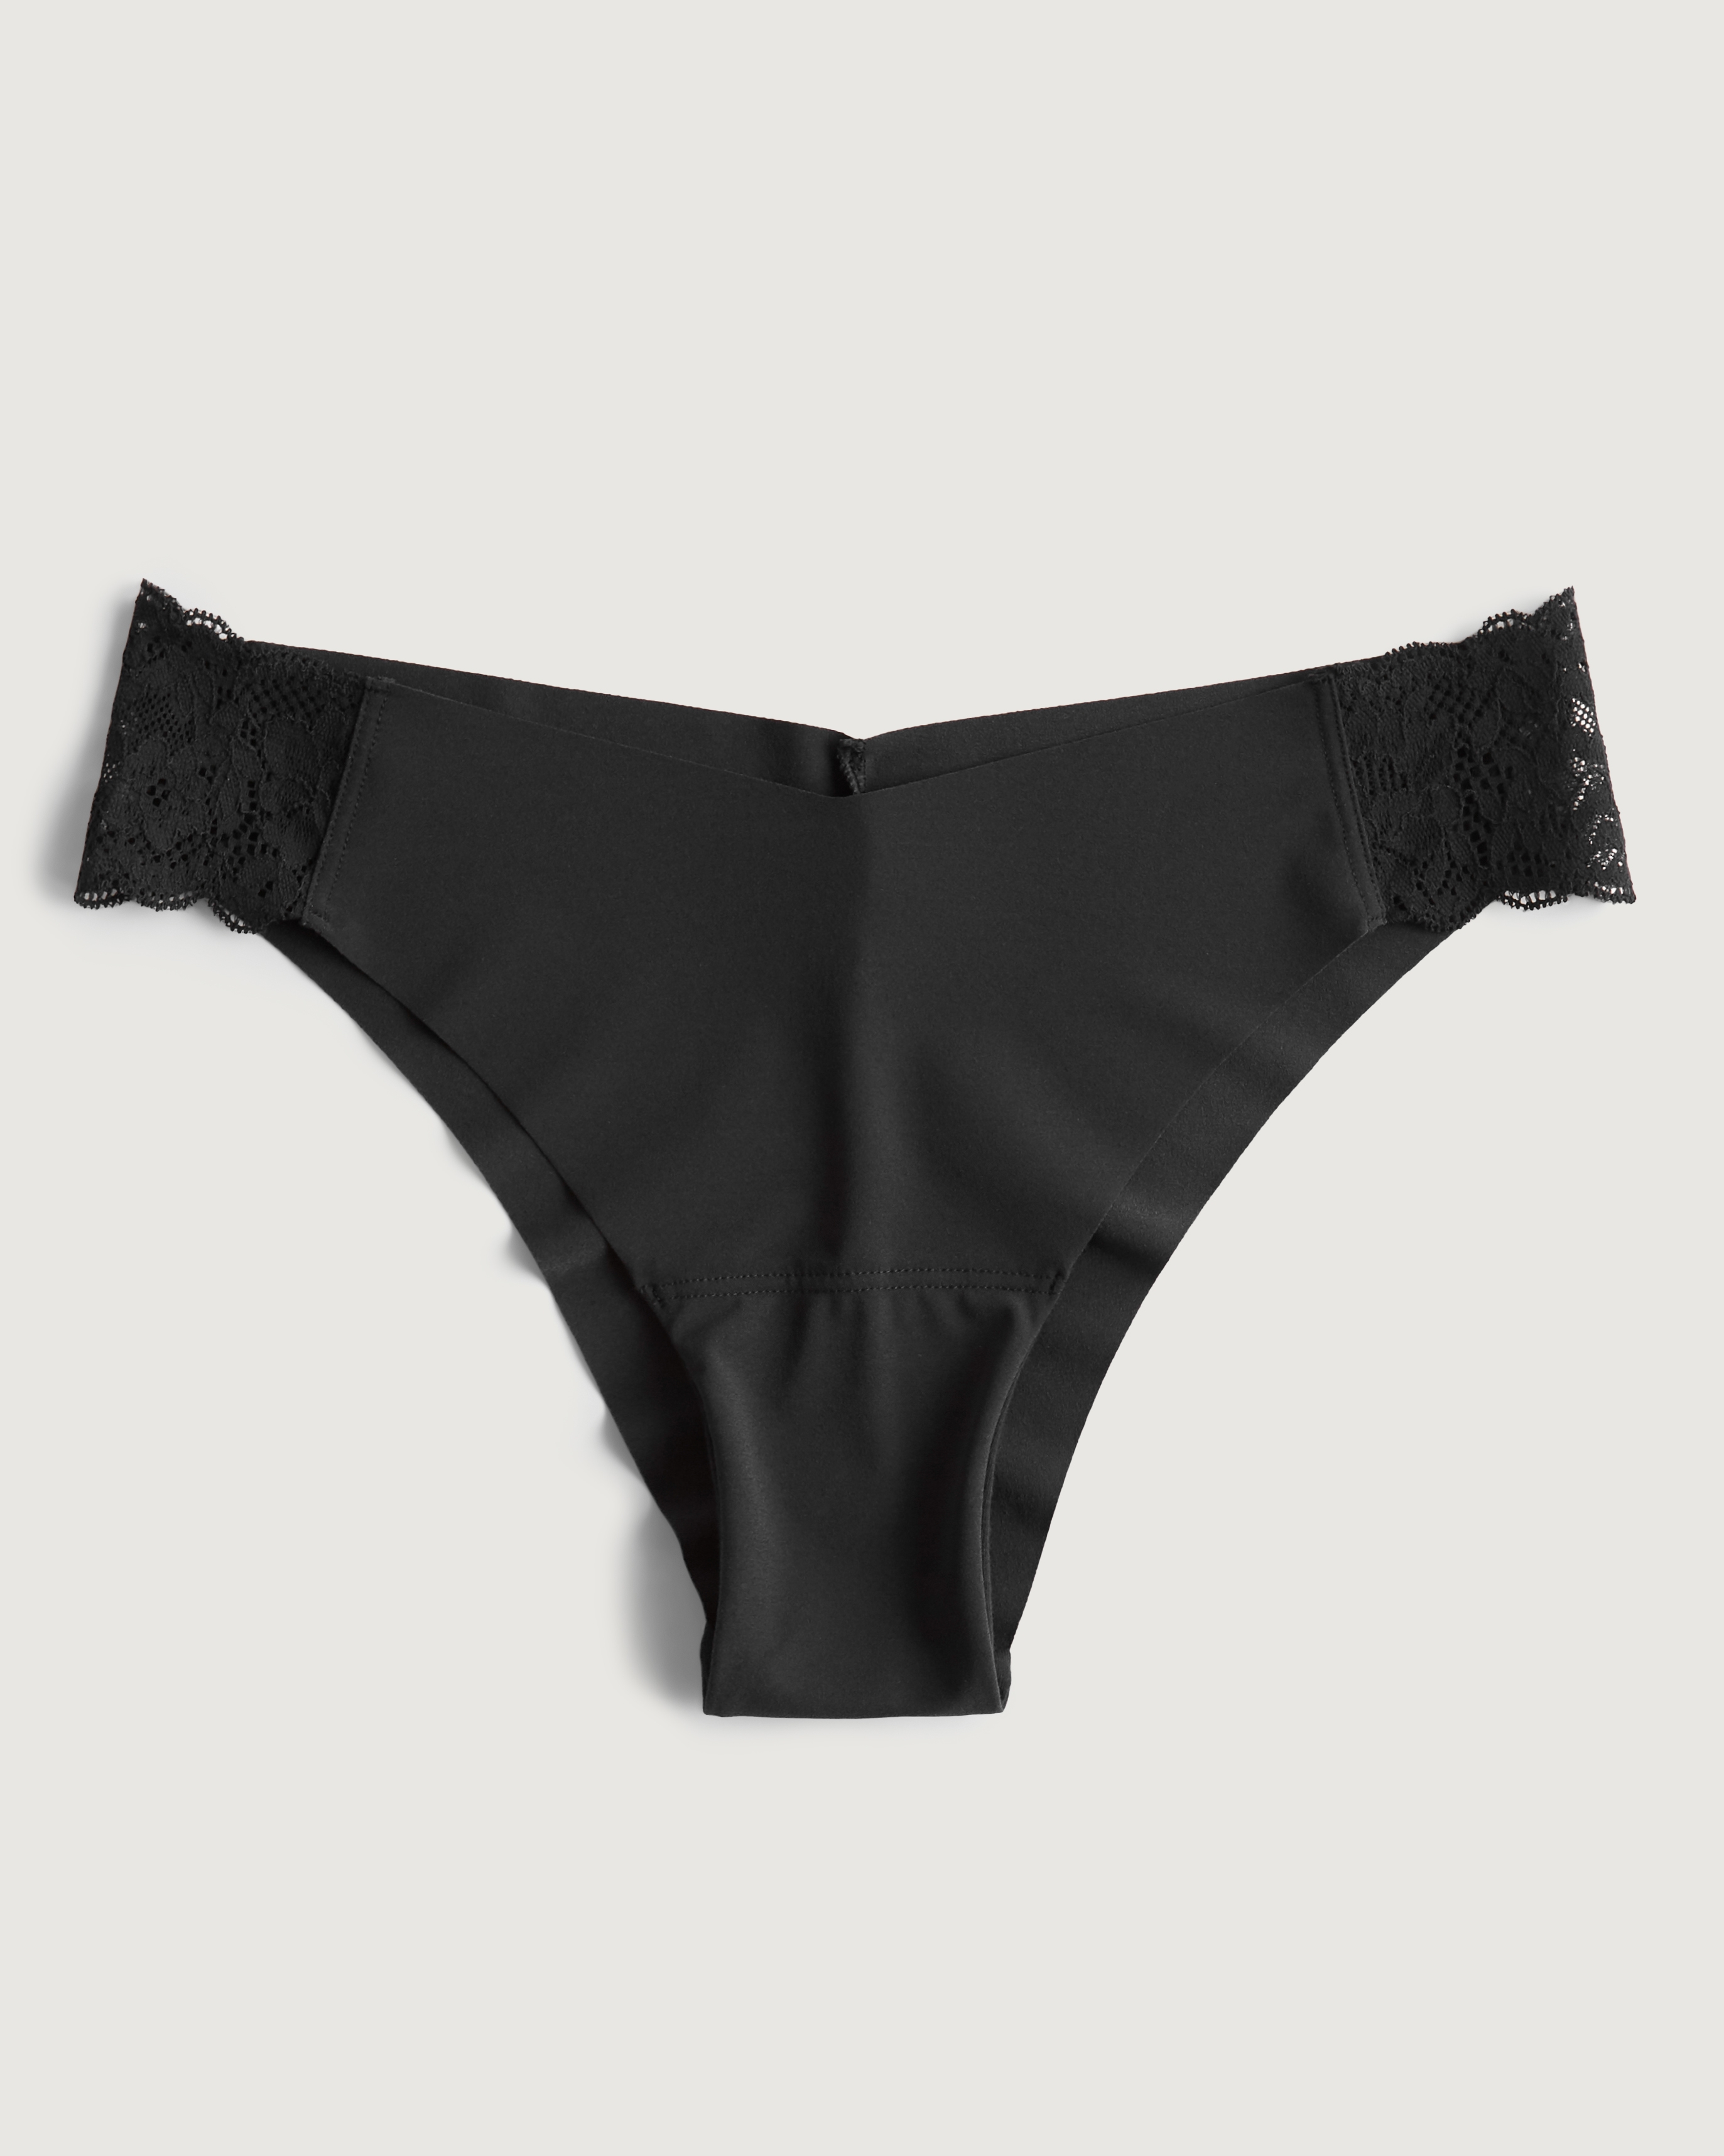 Gilly Hicks Lace-Side No-Show Cheeky Underwear